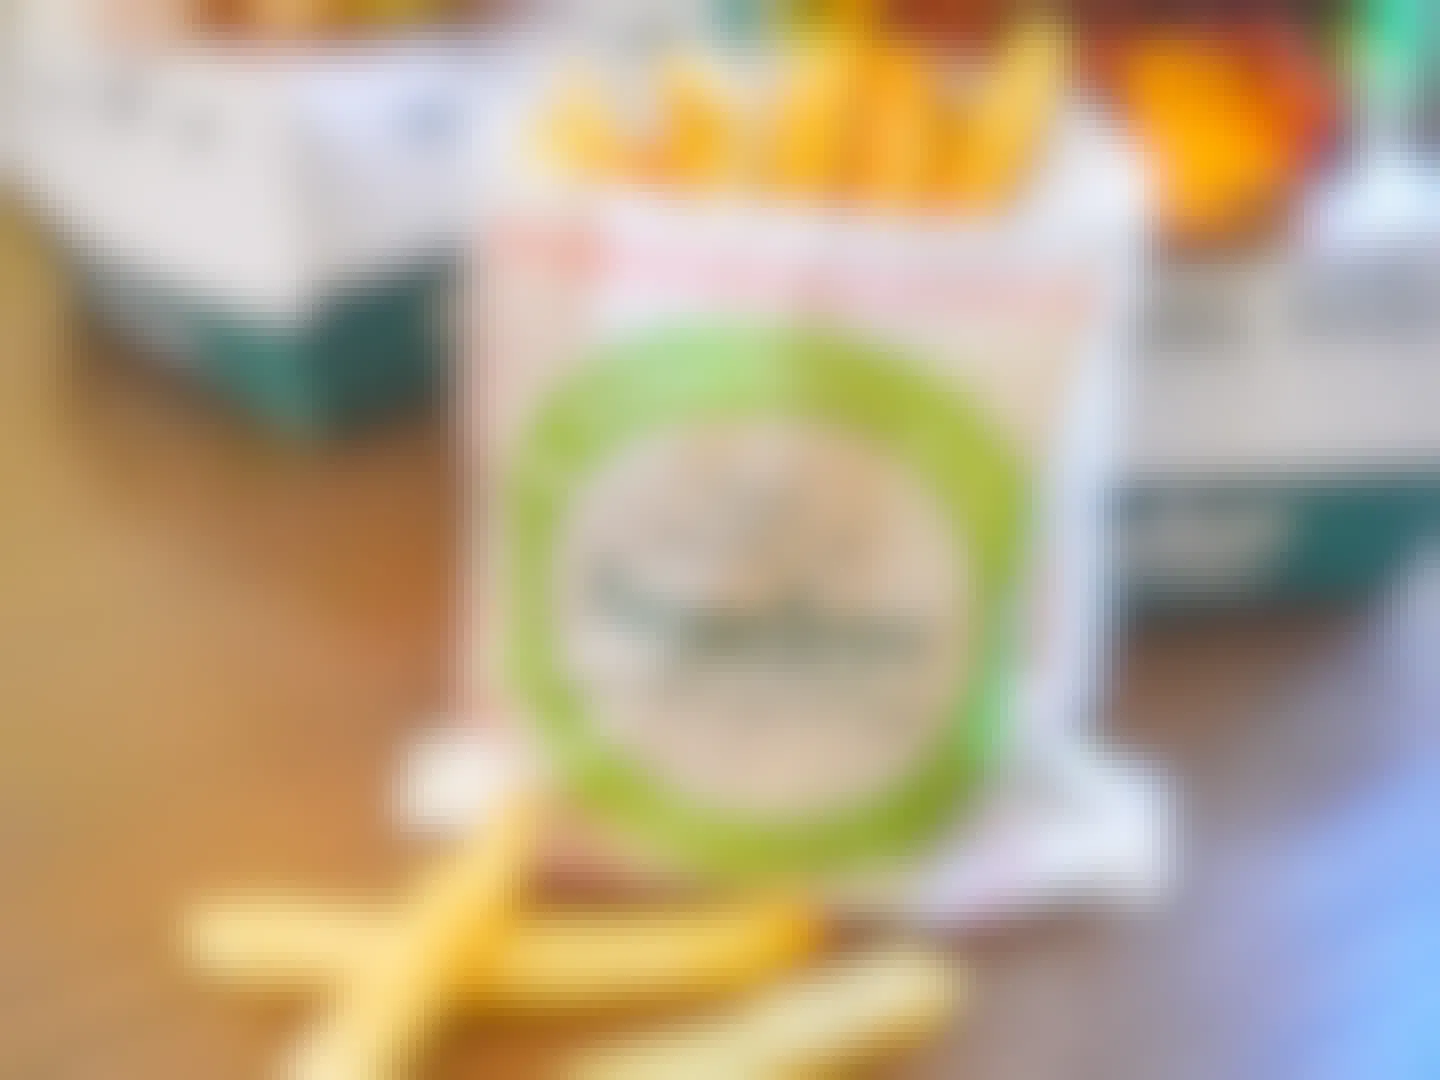 A bag of Farmer Boys french fries and some loose fries on a table in front of some burger boxes.